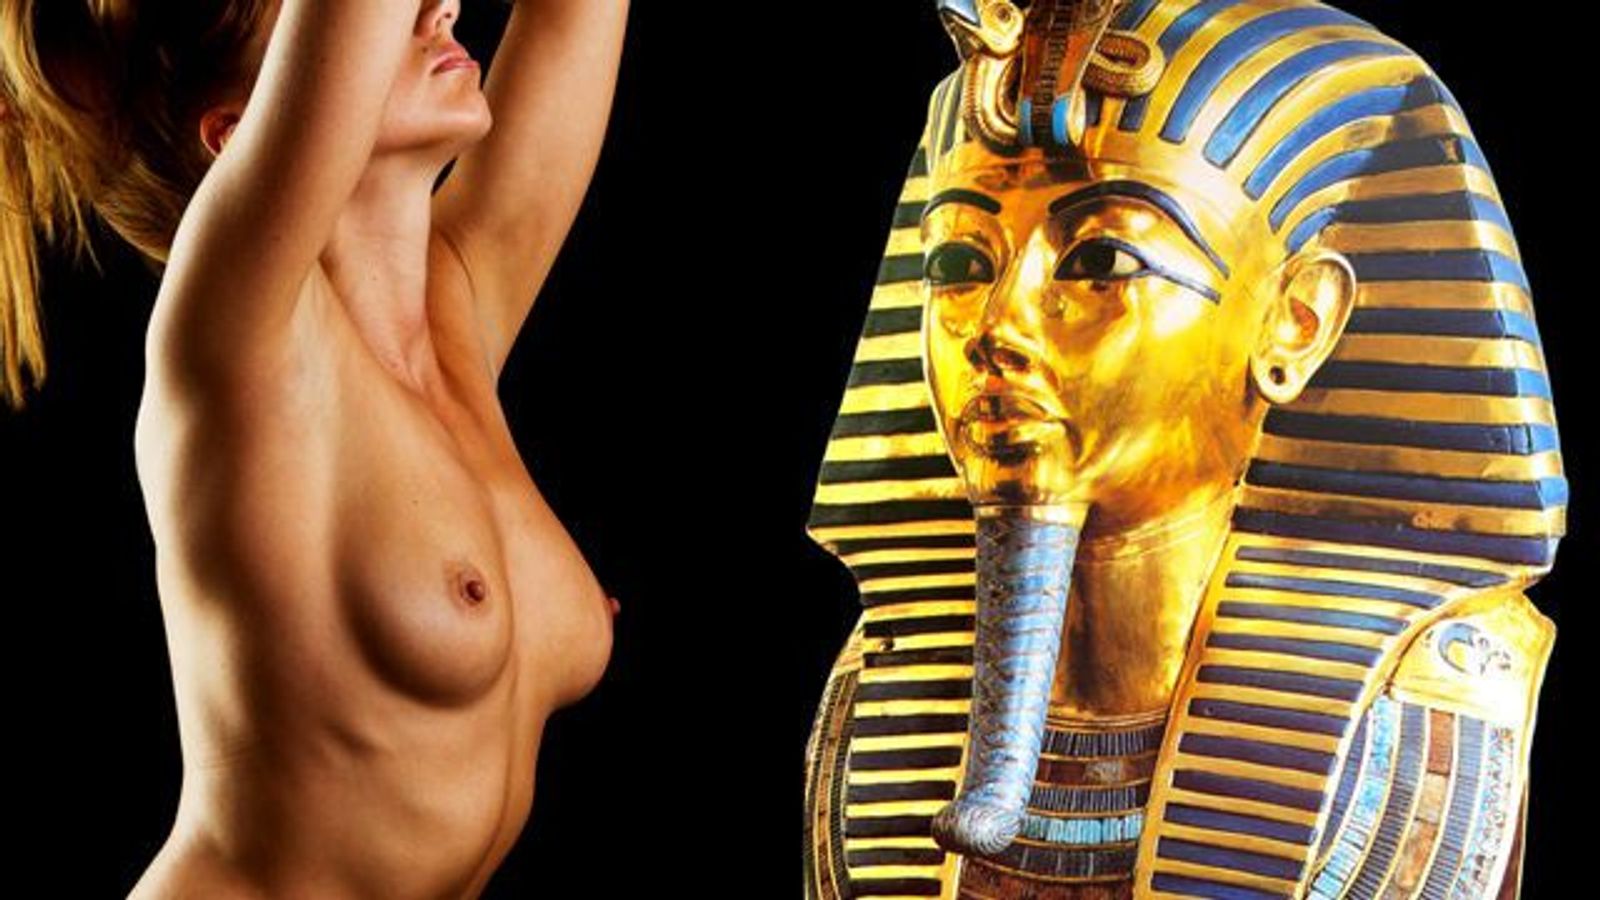 Egyptian Porn Site Ban Debated During Cairo IT Conference